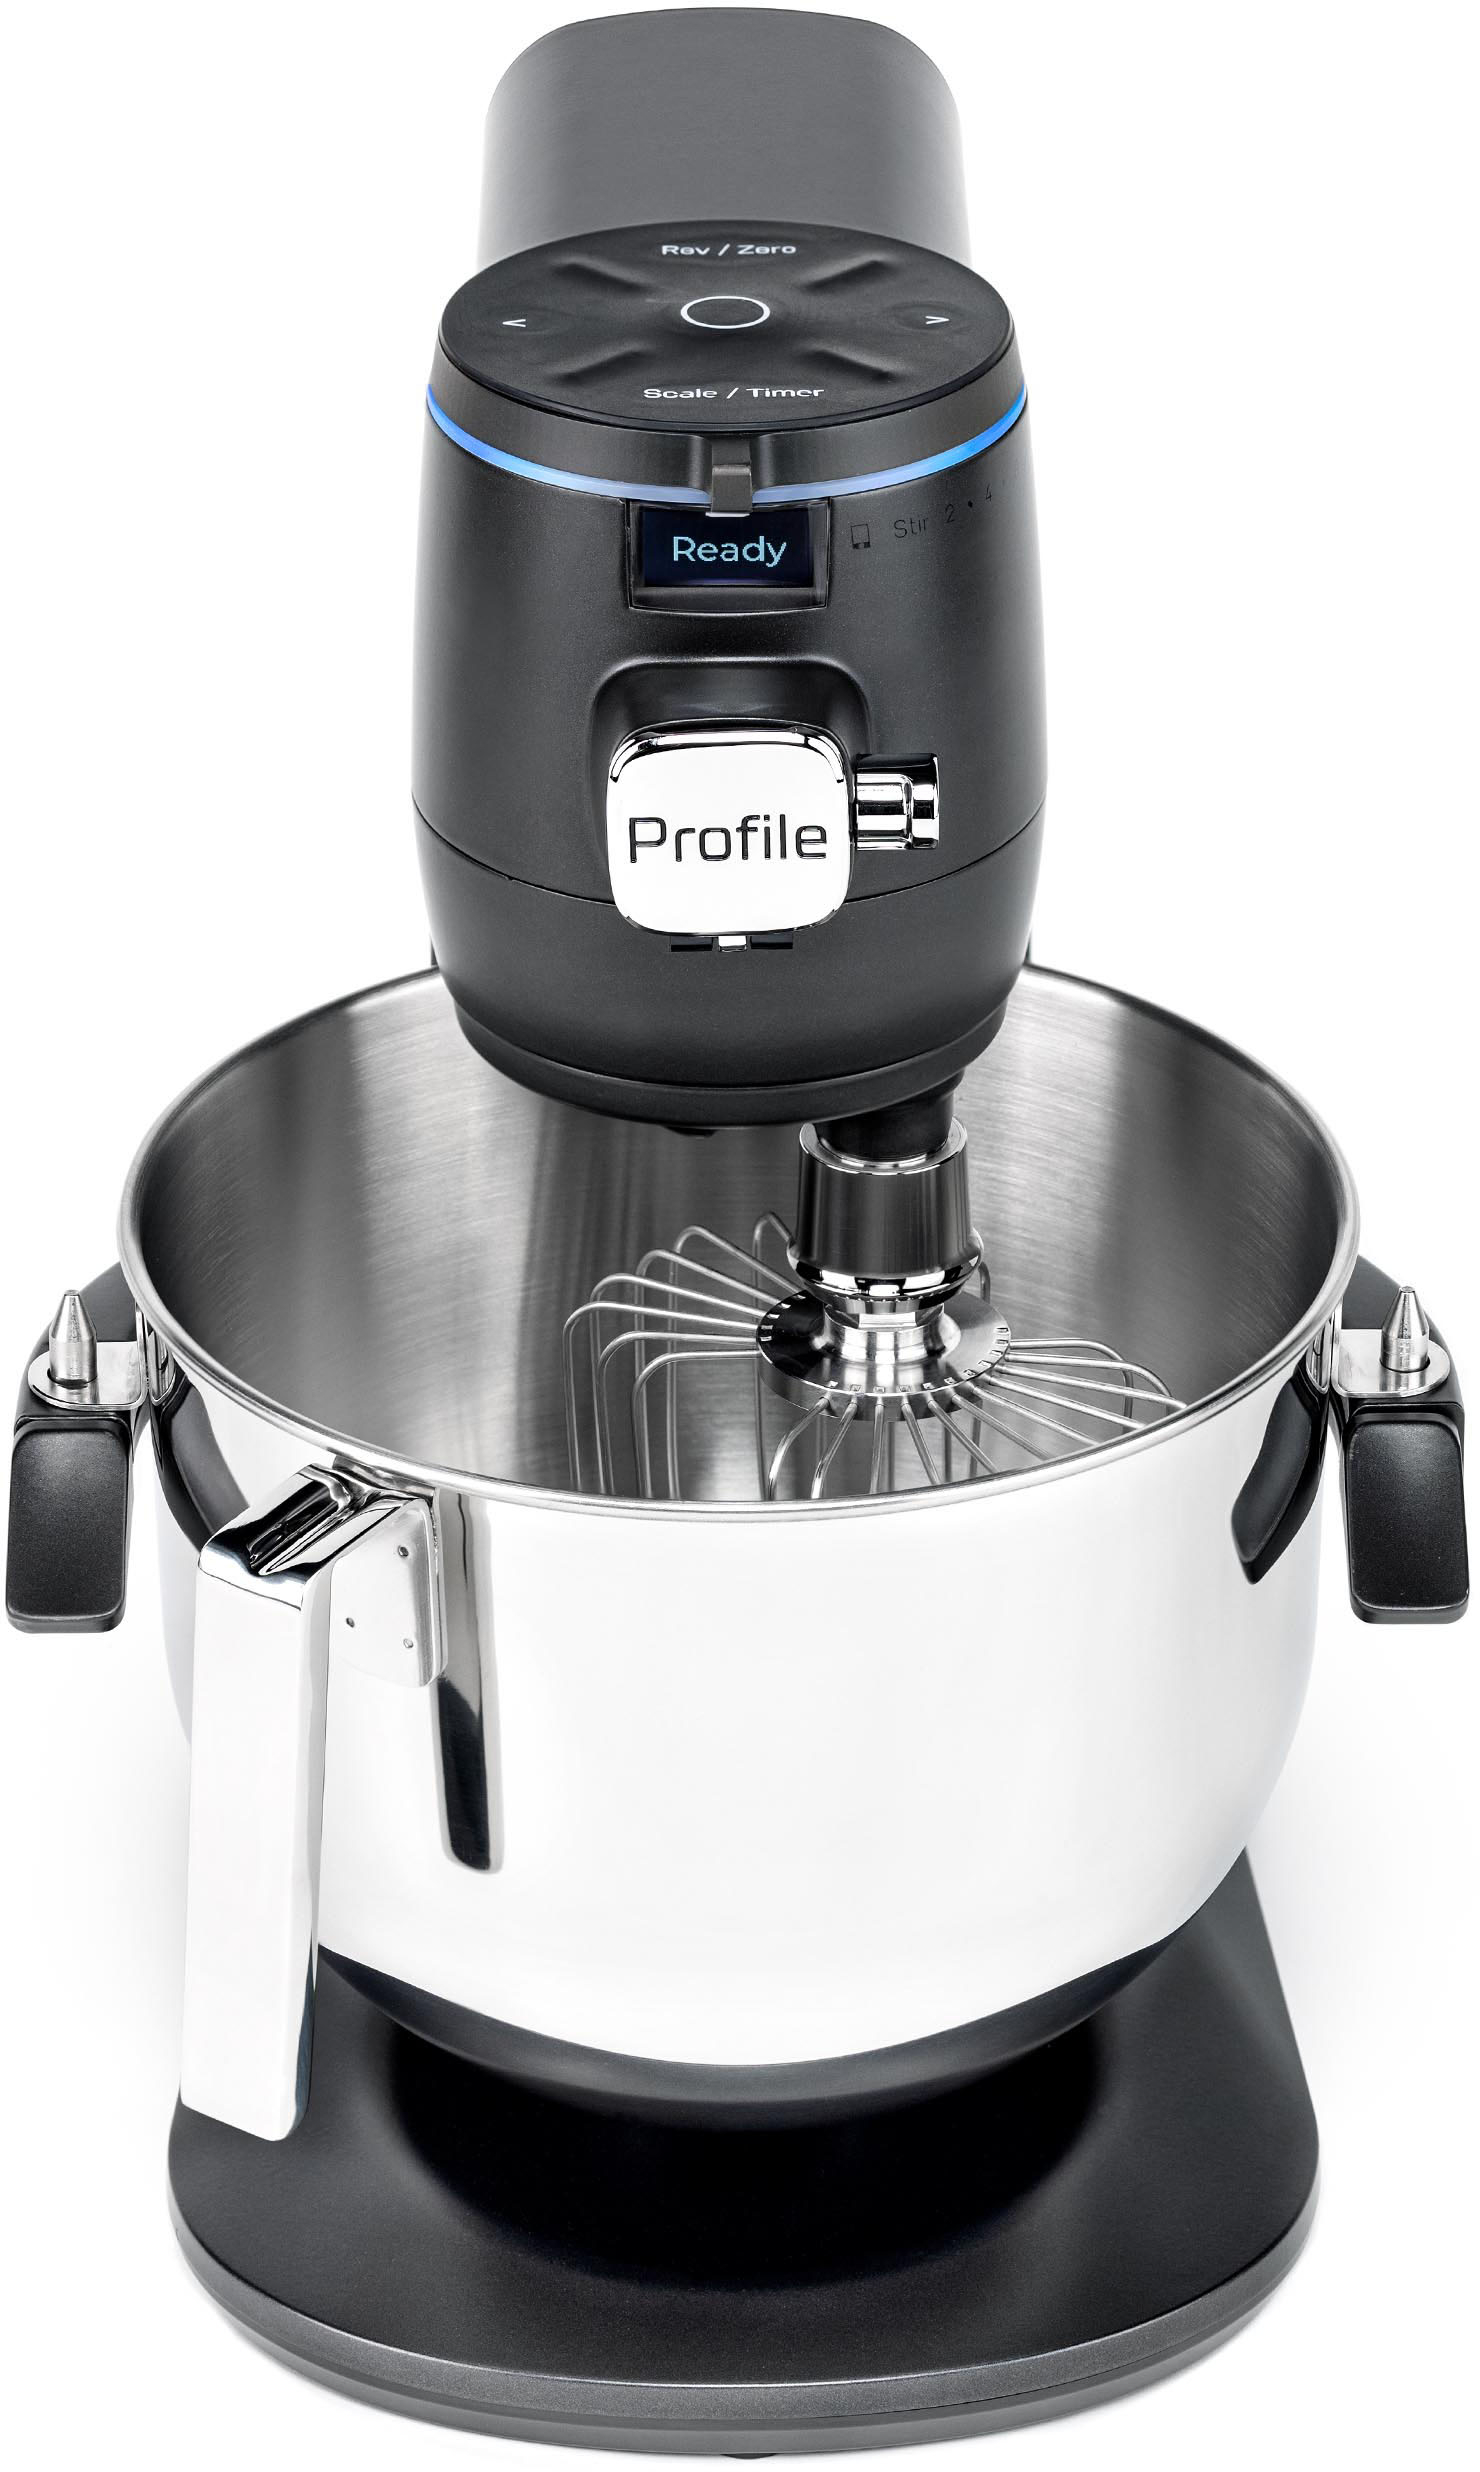 GE Profile Smart Mixer With AutoSense In Mineral Silver - P8MSASS6TGW